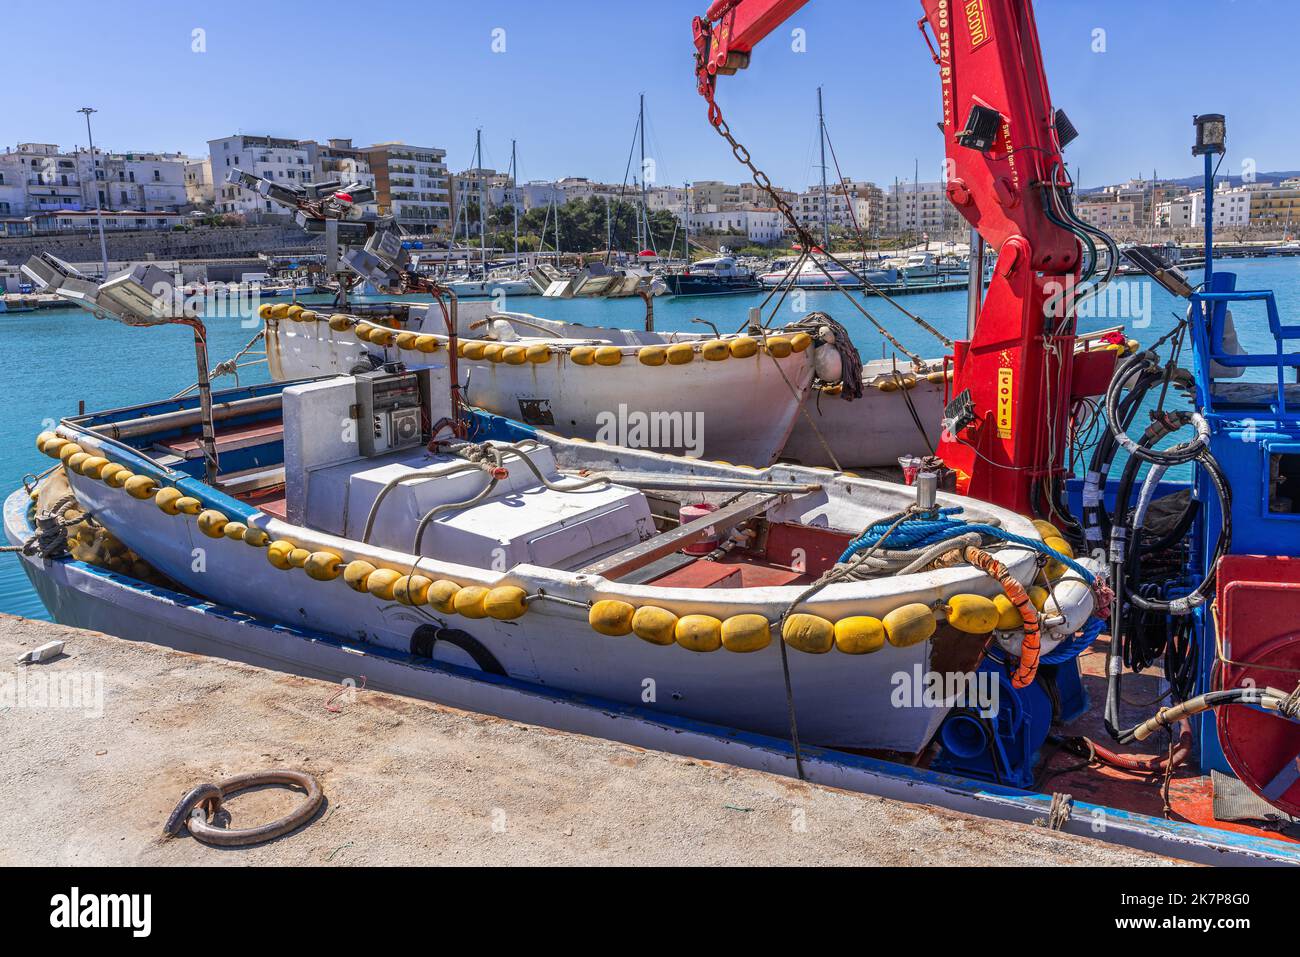 Small boats for trawling in the port of Peschici. Peschici, Foggia province, Apulia, Italy, Europe Stock Photo